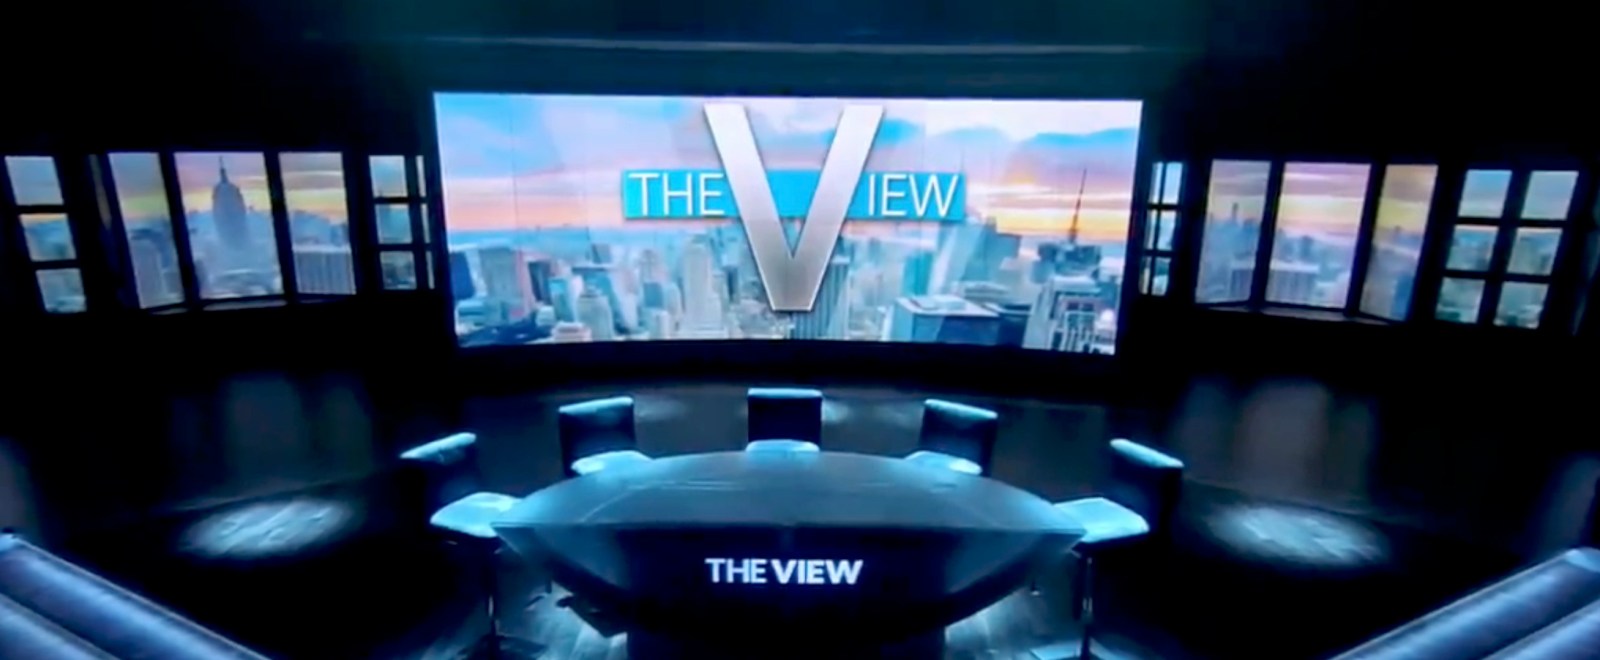 the-view.jpg